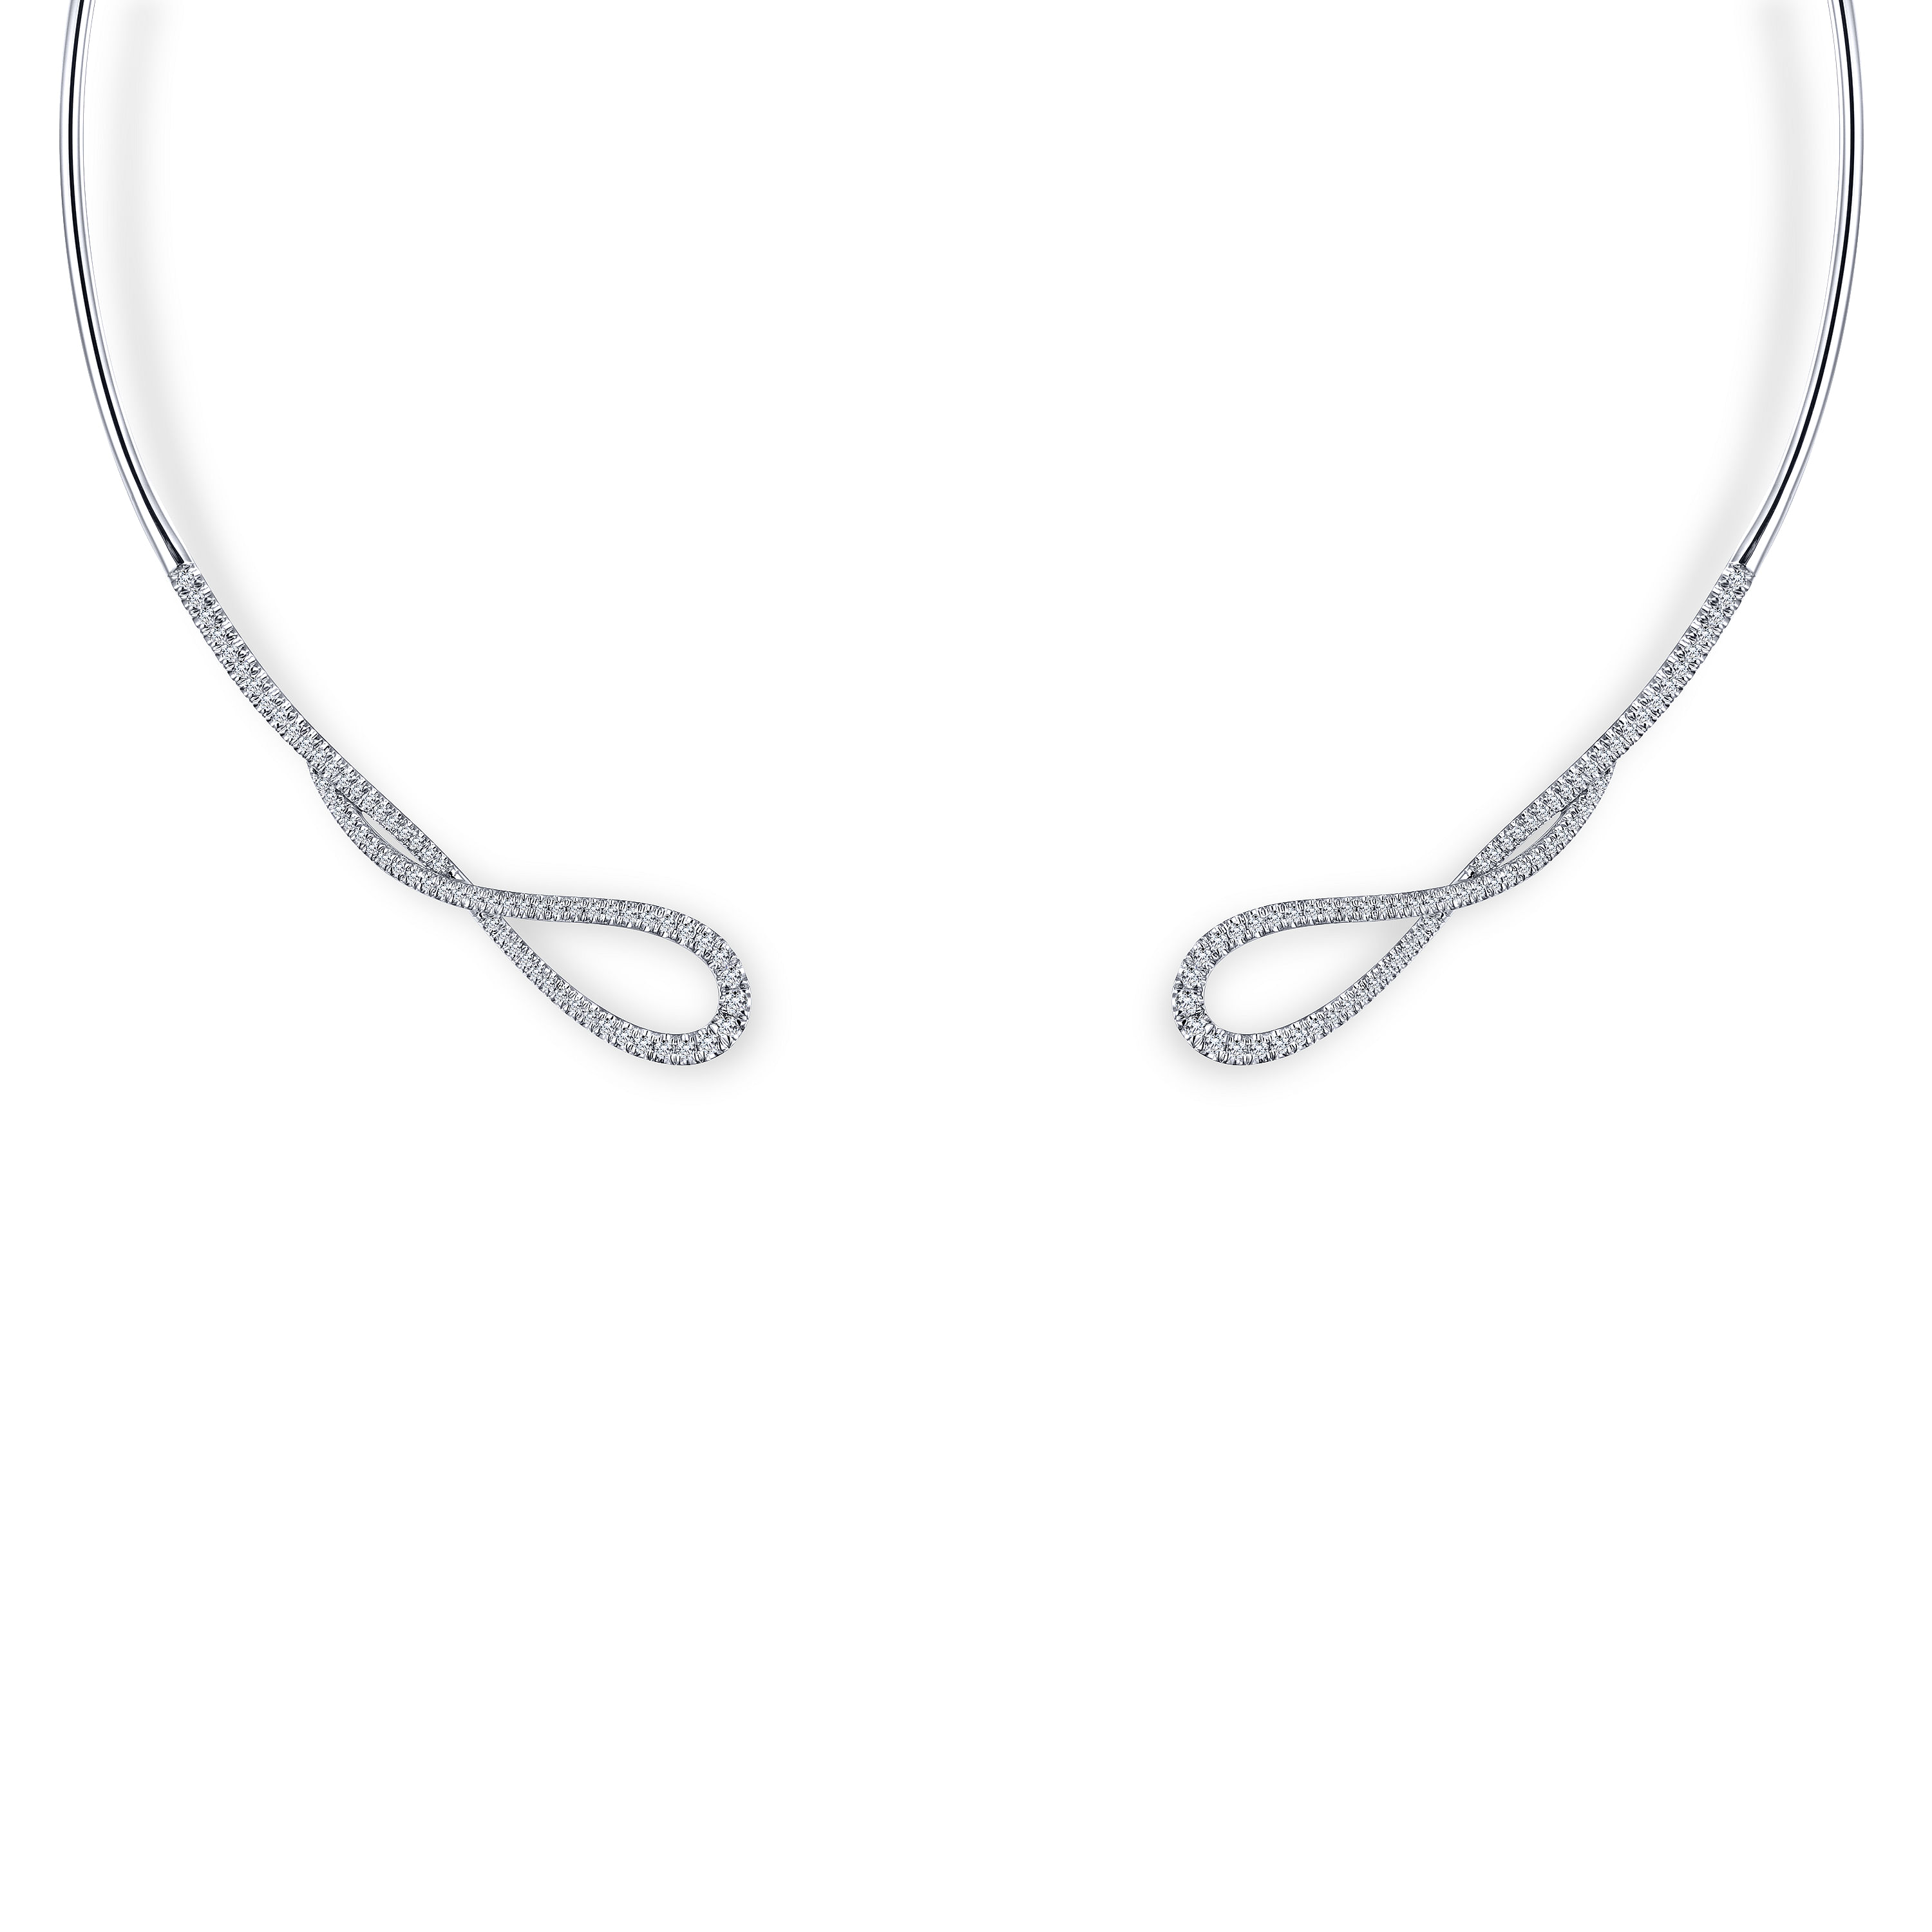 14K White Gold Open Twisted Diamond Collar Necklace